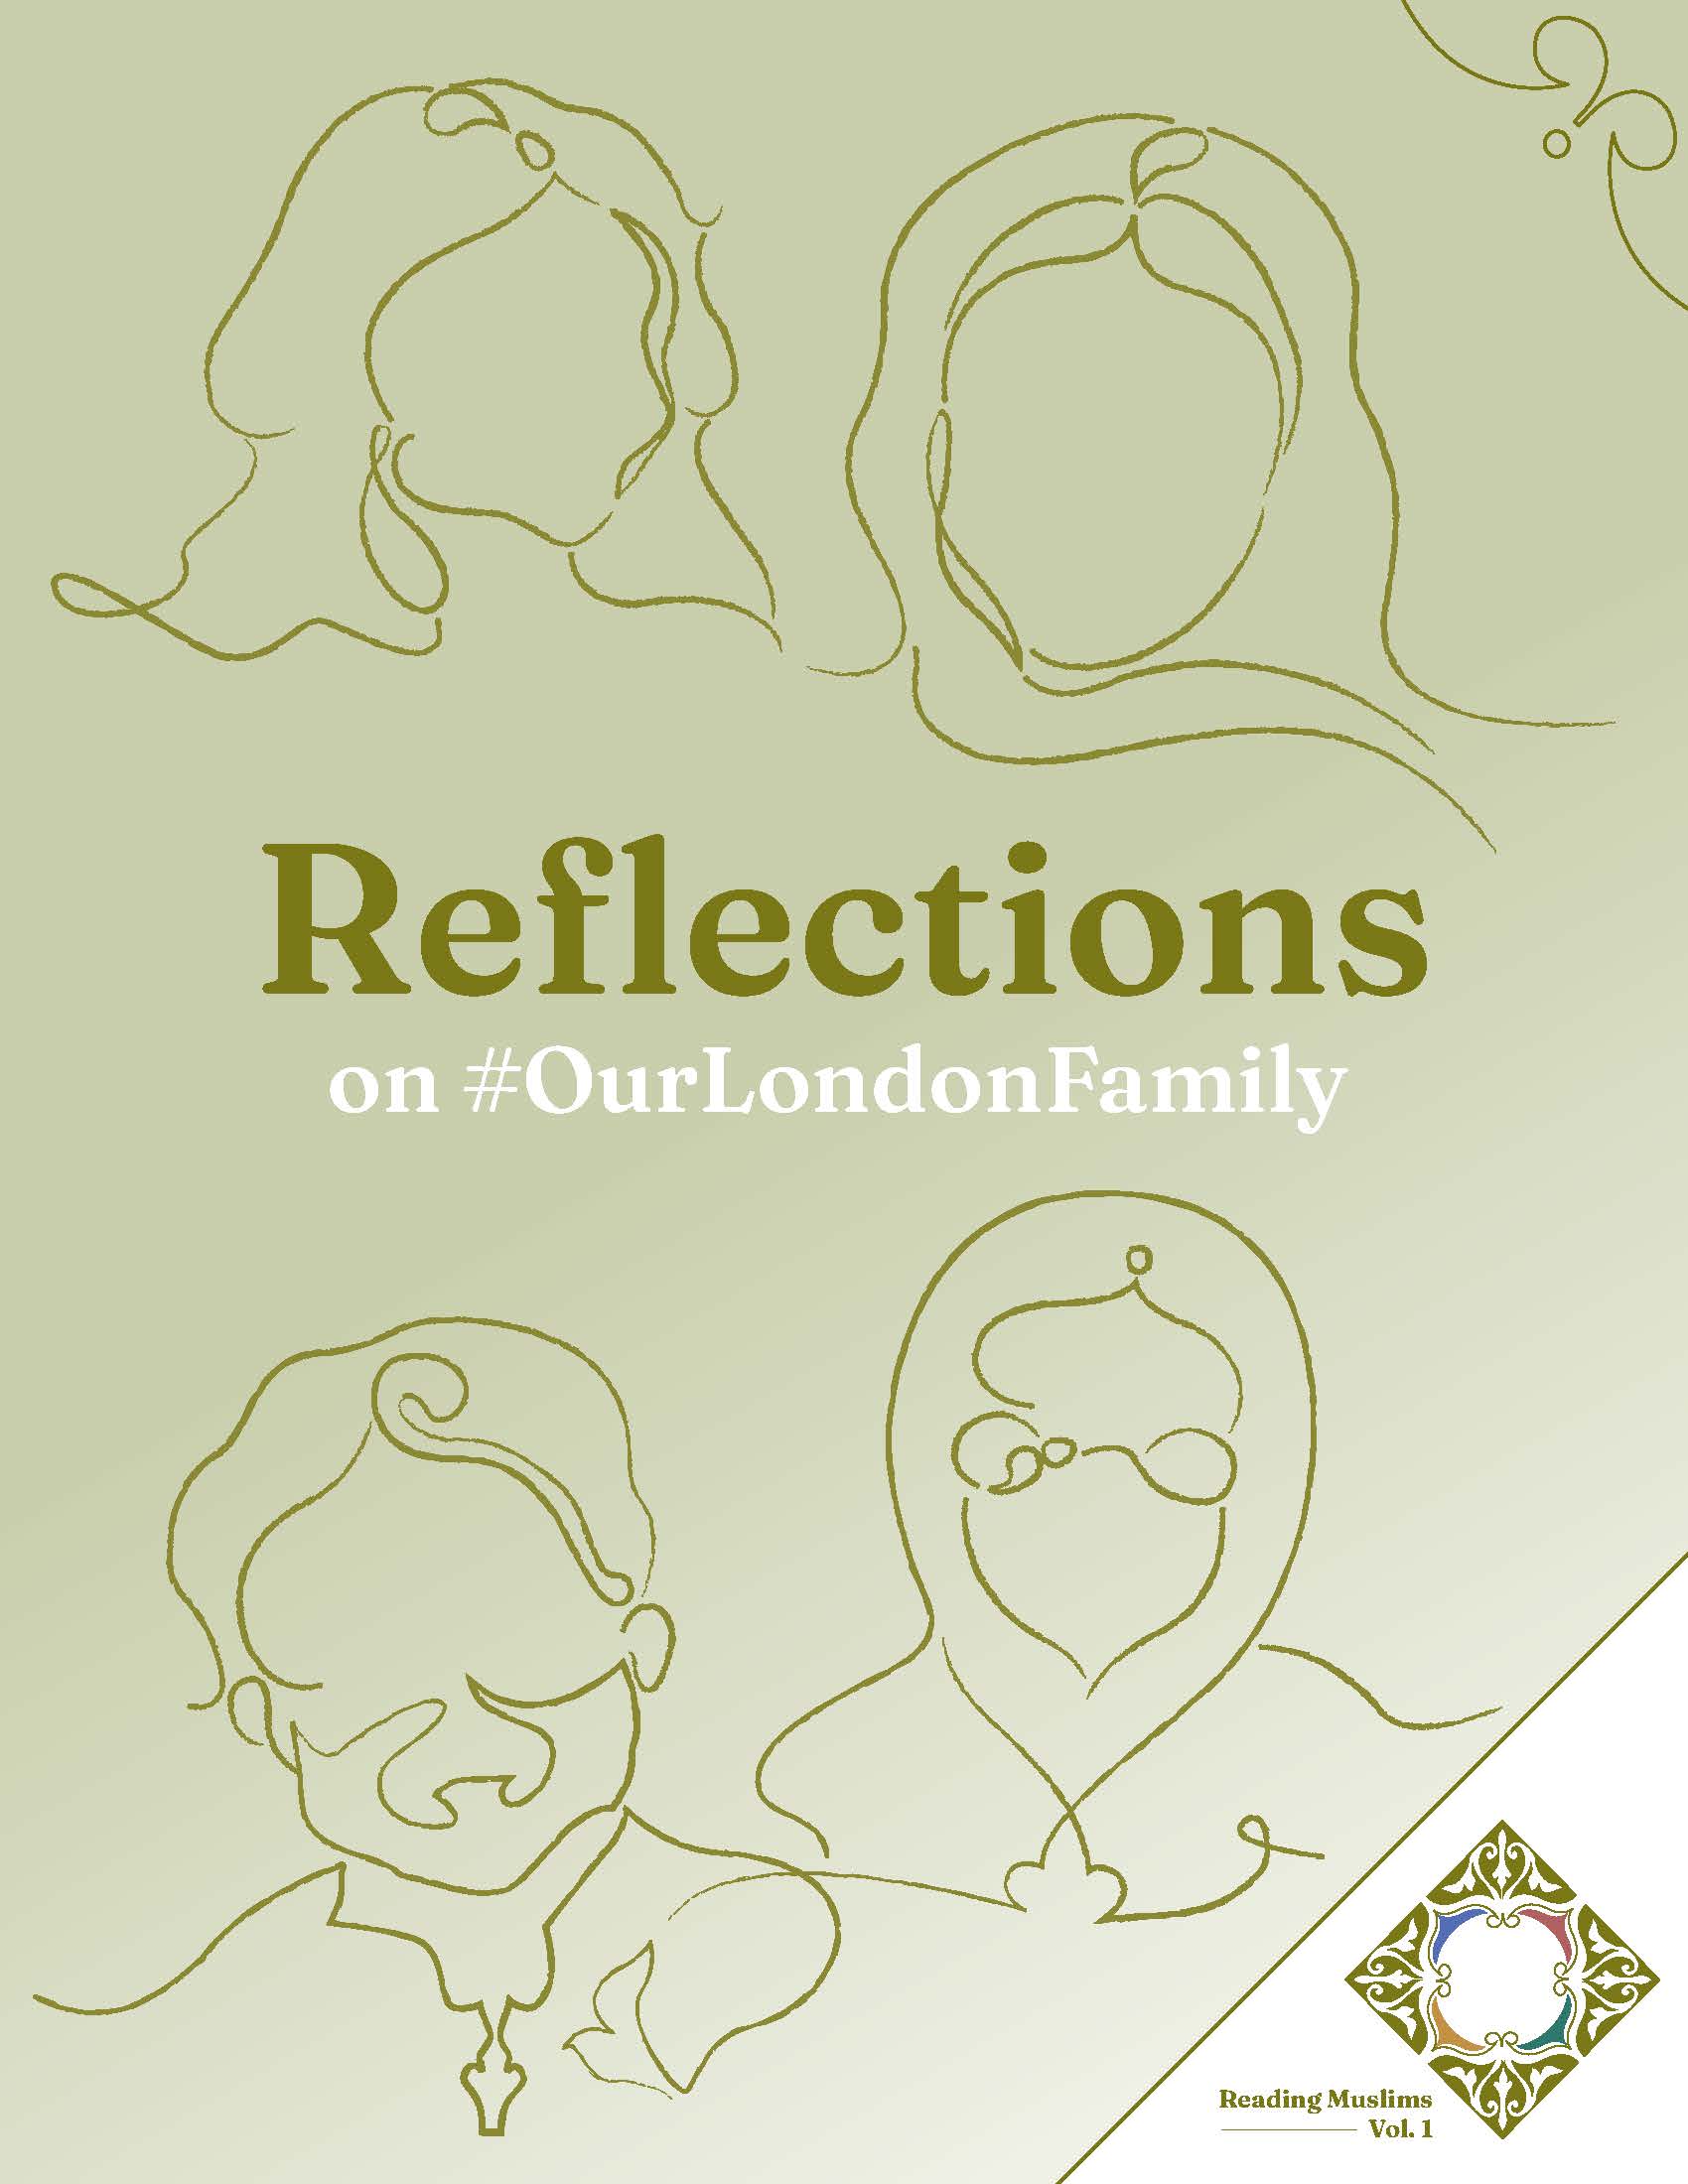 Reading Muslims (Vol I): Reflections on #OurLondonFamily